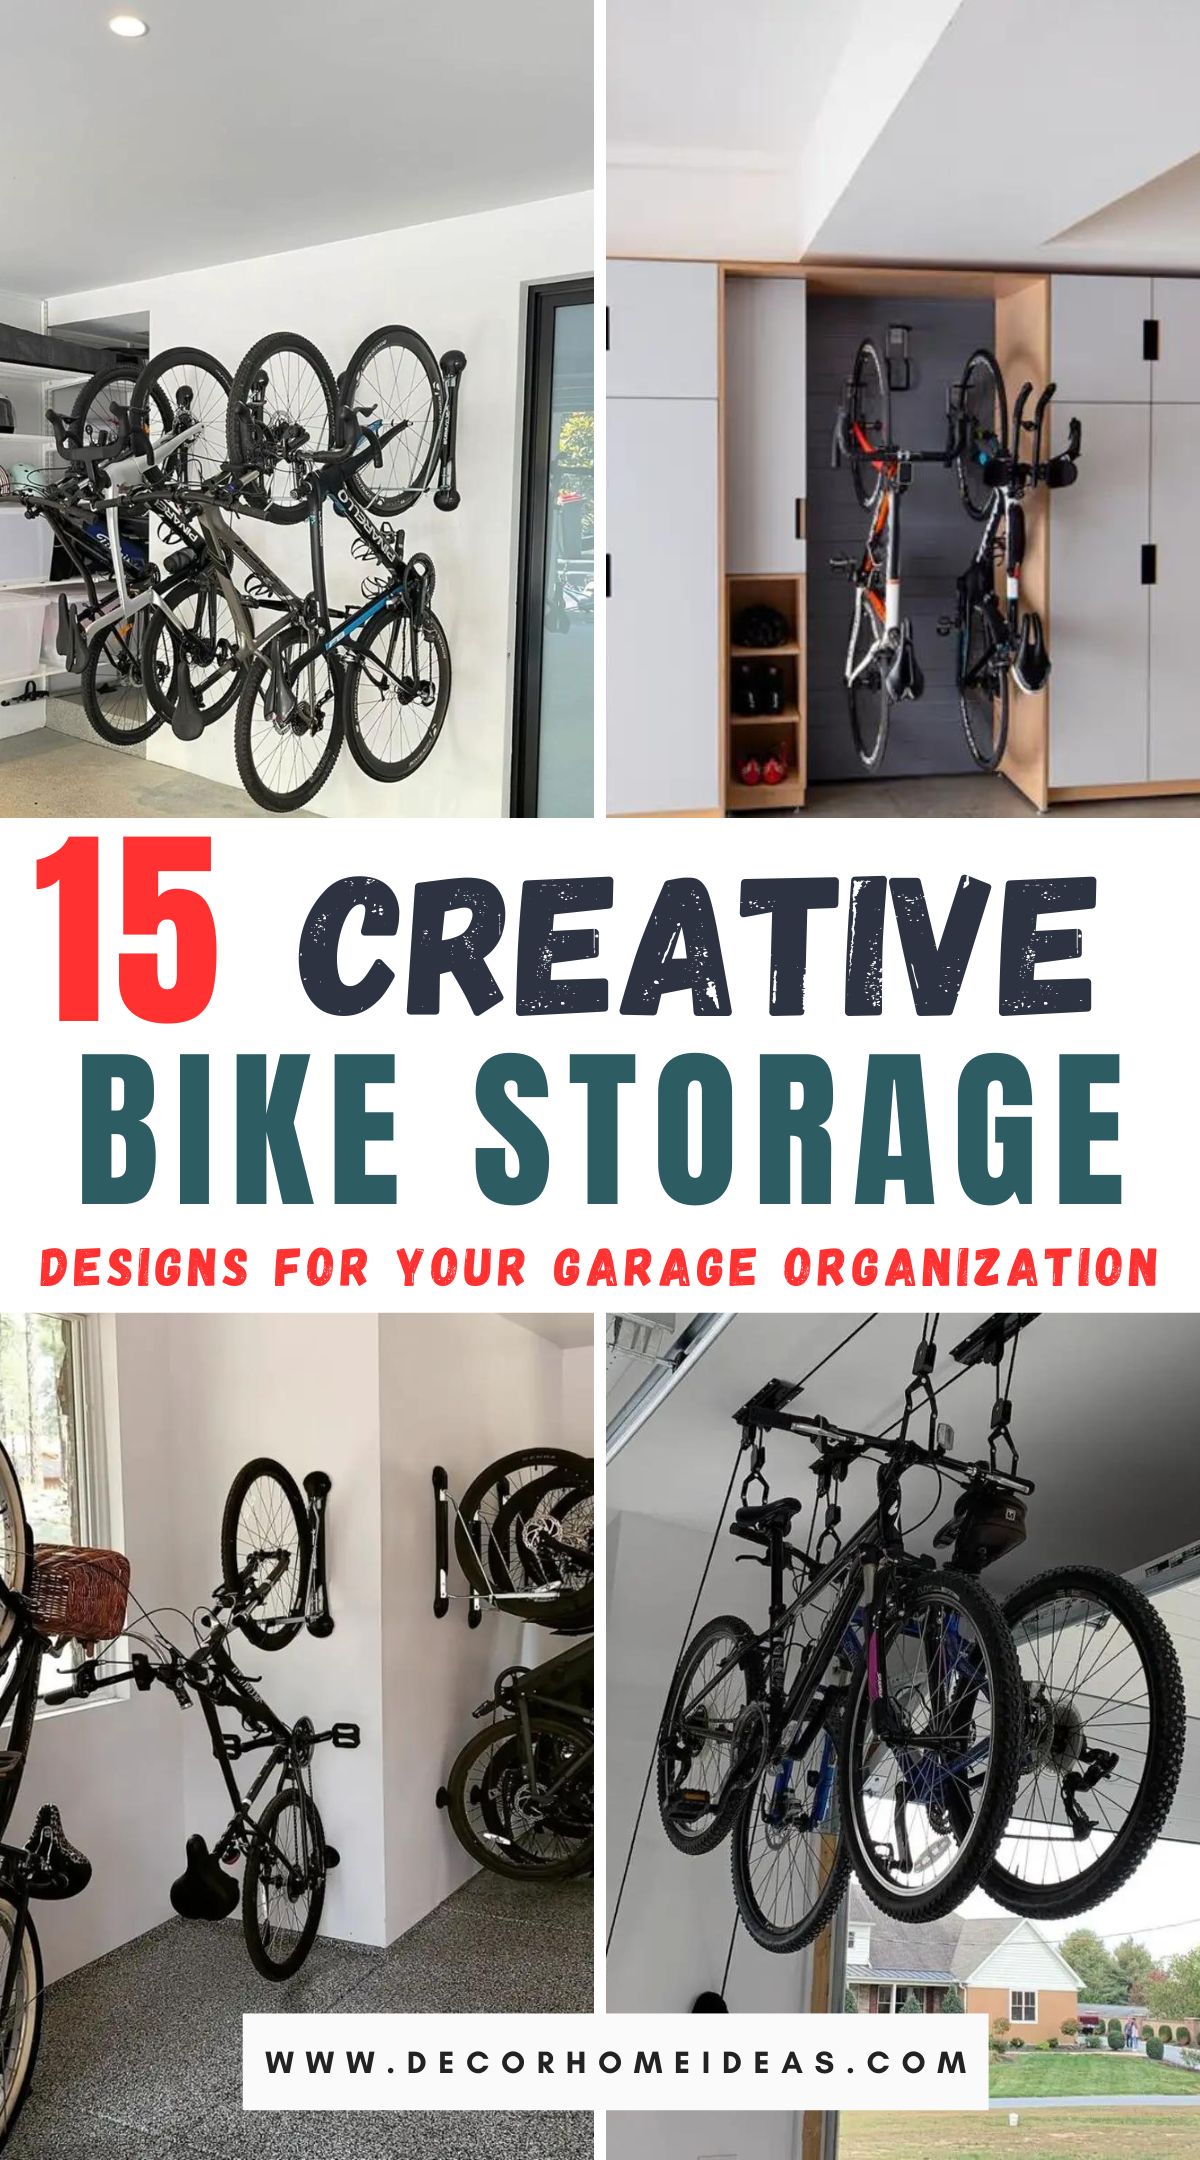 Optimize your garage space with these 15 ingenious bike storage solutions. Discover creative ways to keep your bicycles organized and out of the way while maximizing your storage efficiency.